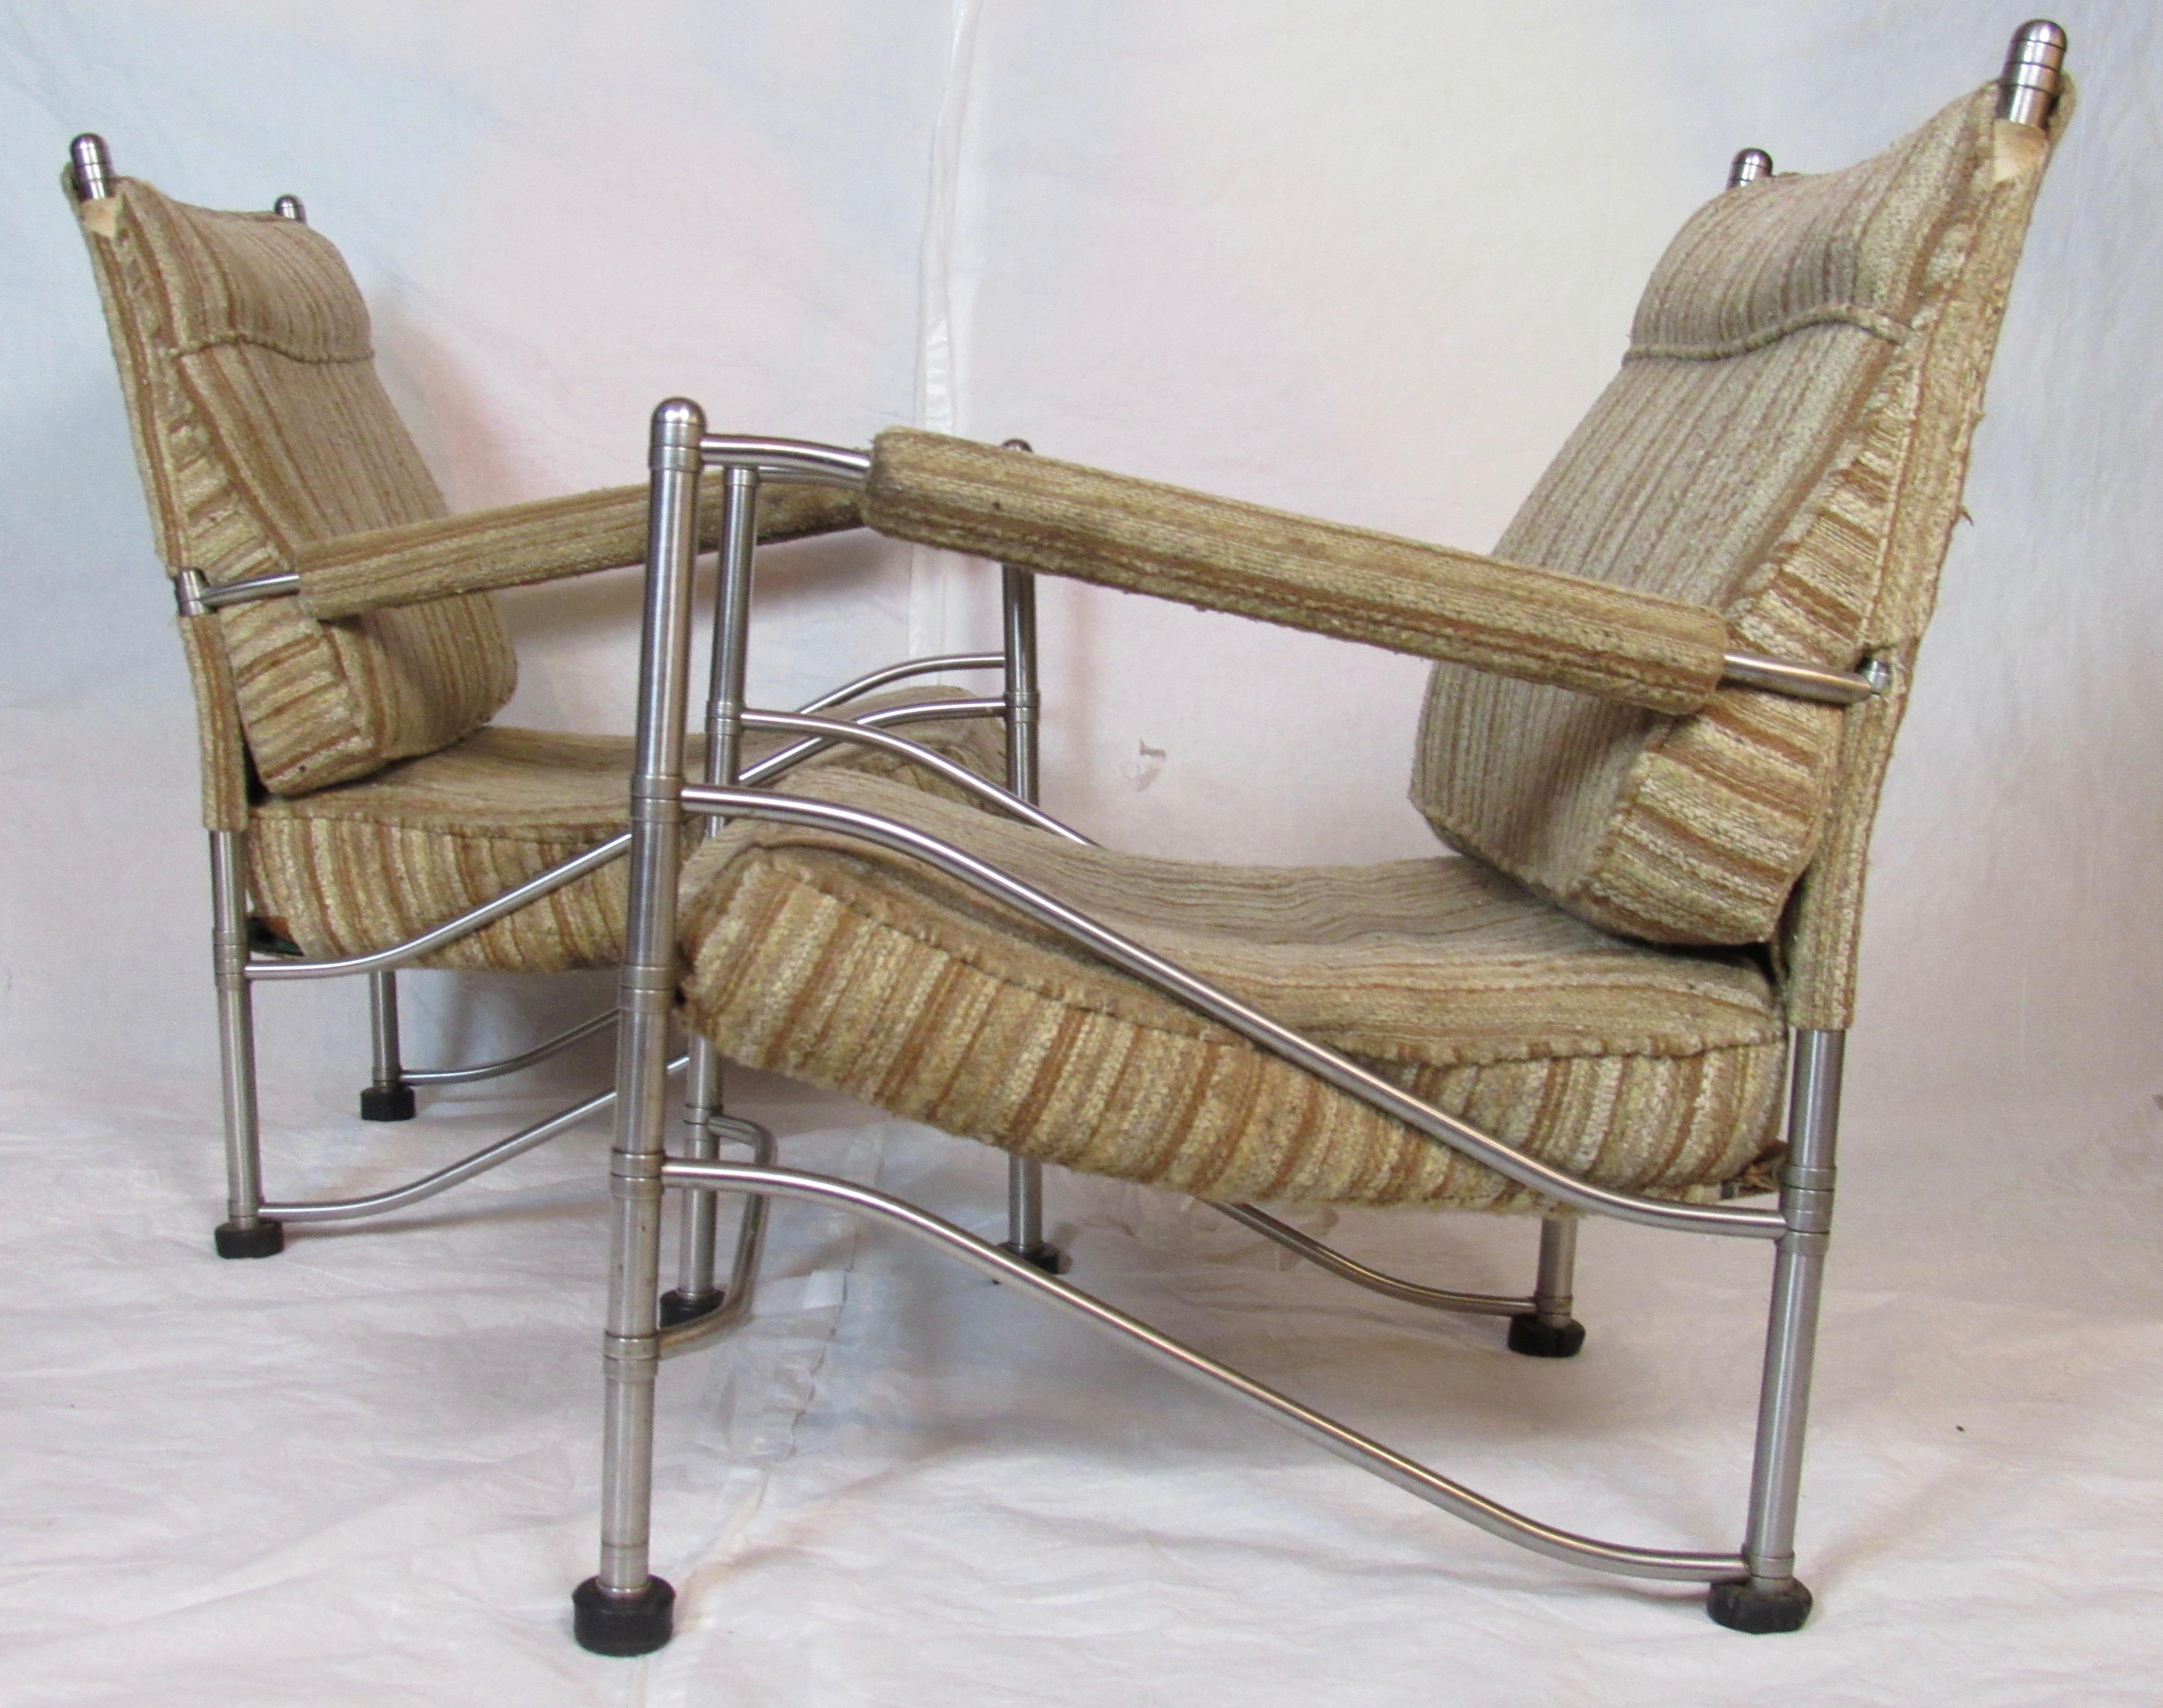 A pair of lounge chairs by the Warren McArthur Corporation from the mid-1930s with stainless steel frames. 

Union Carbide commissioned this pair of lounge chairs with 14 other McArthur pieces in stainless steel for the terrace of a summer home in